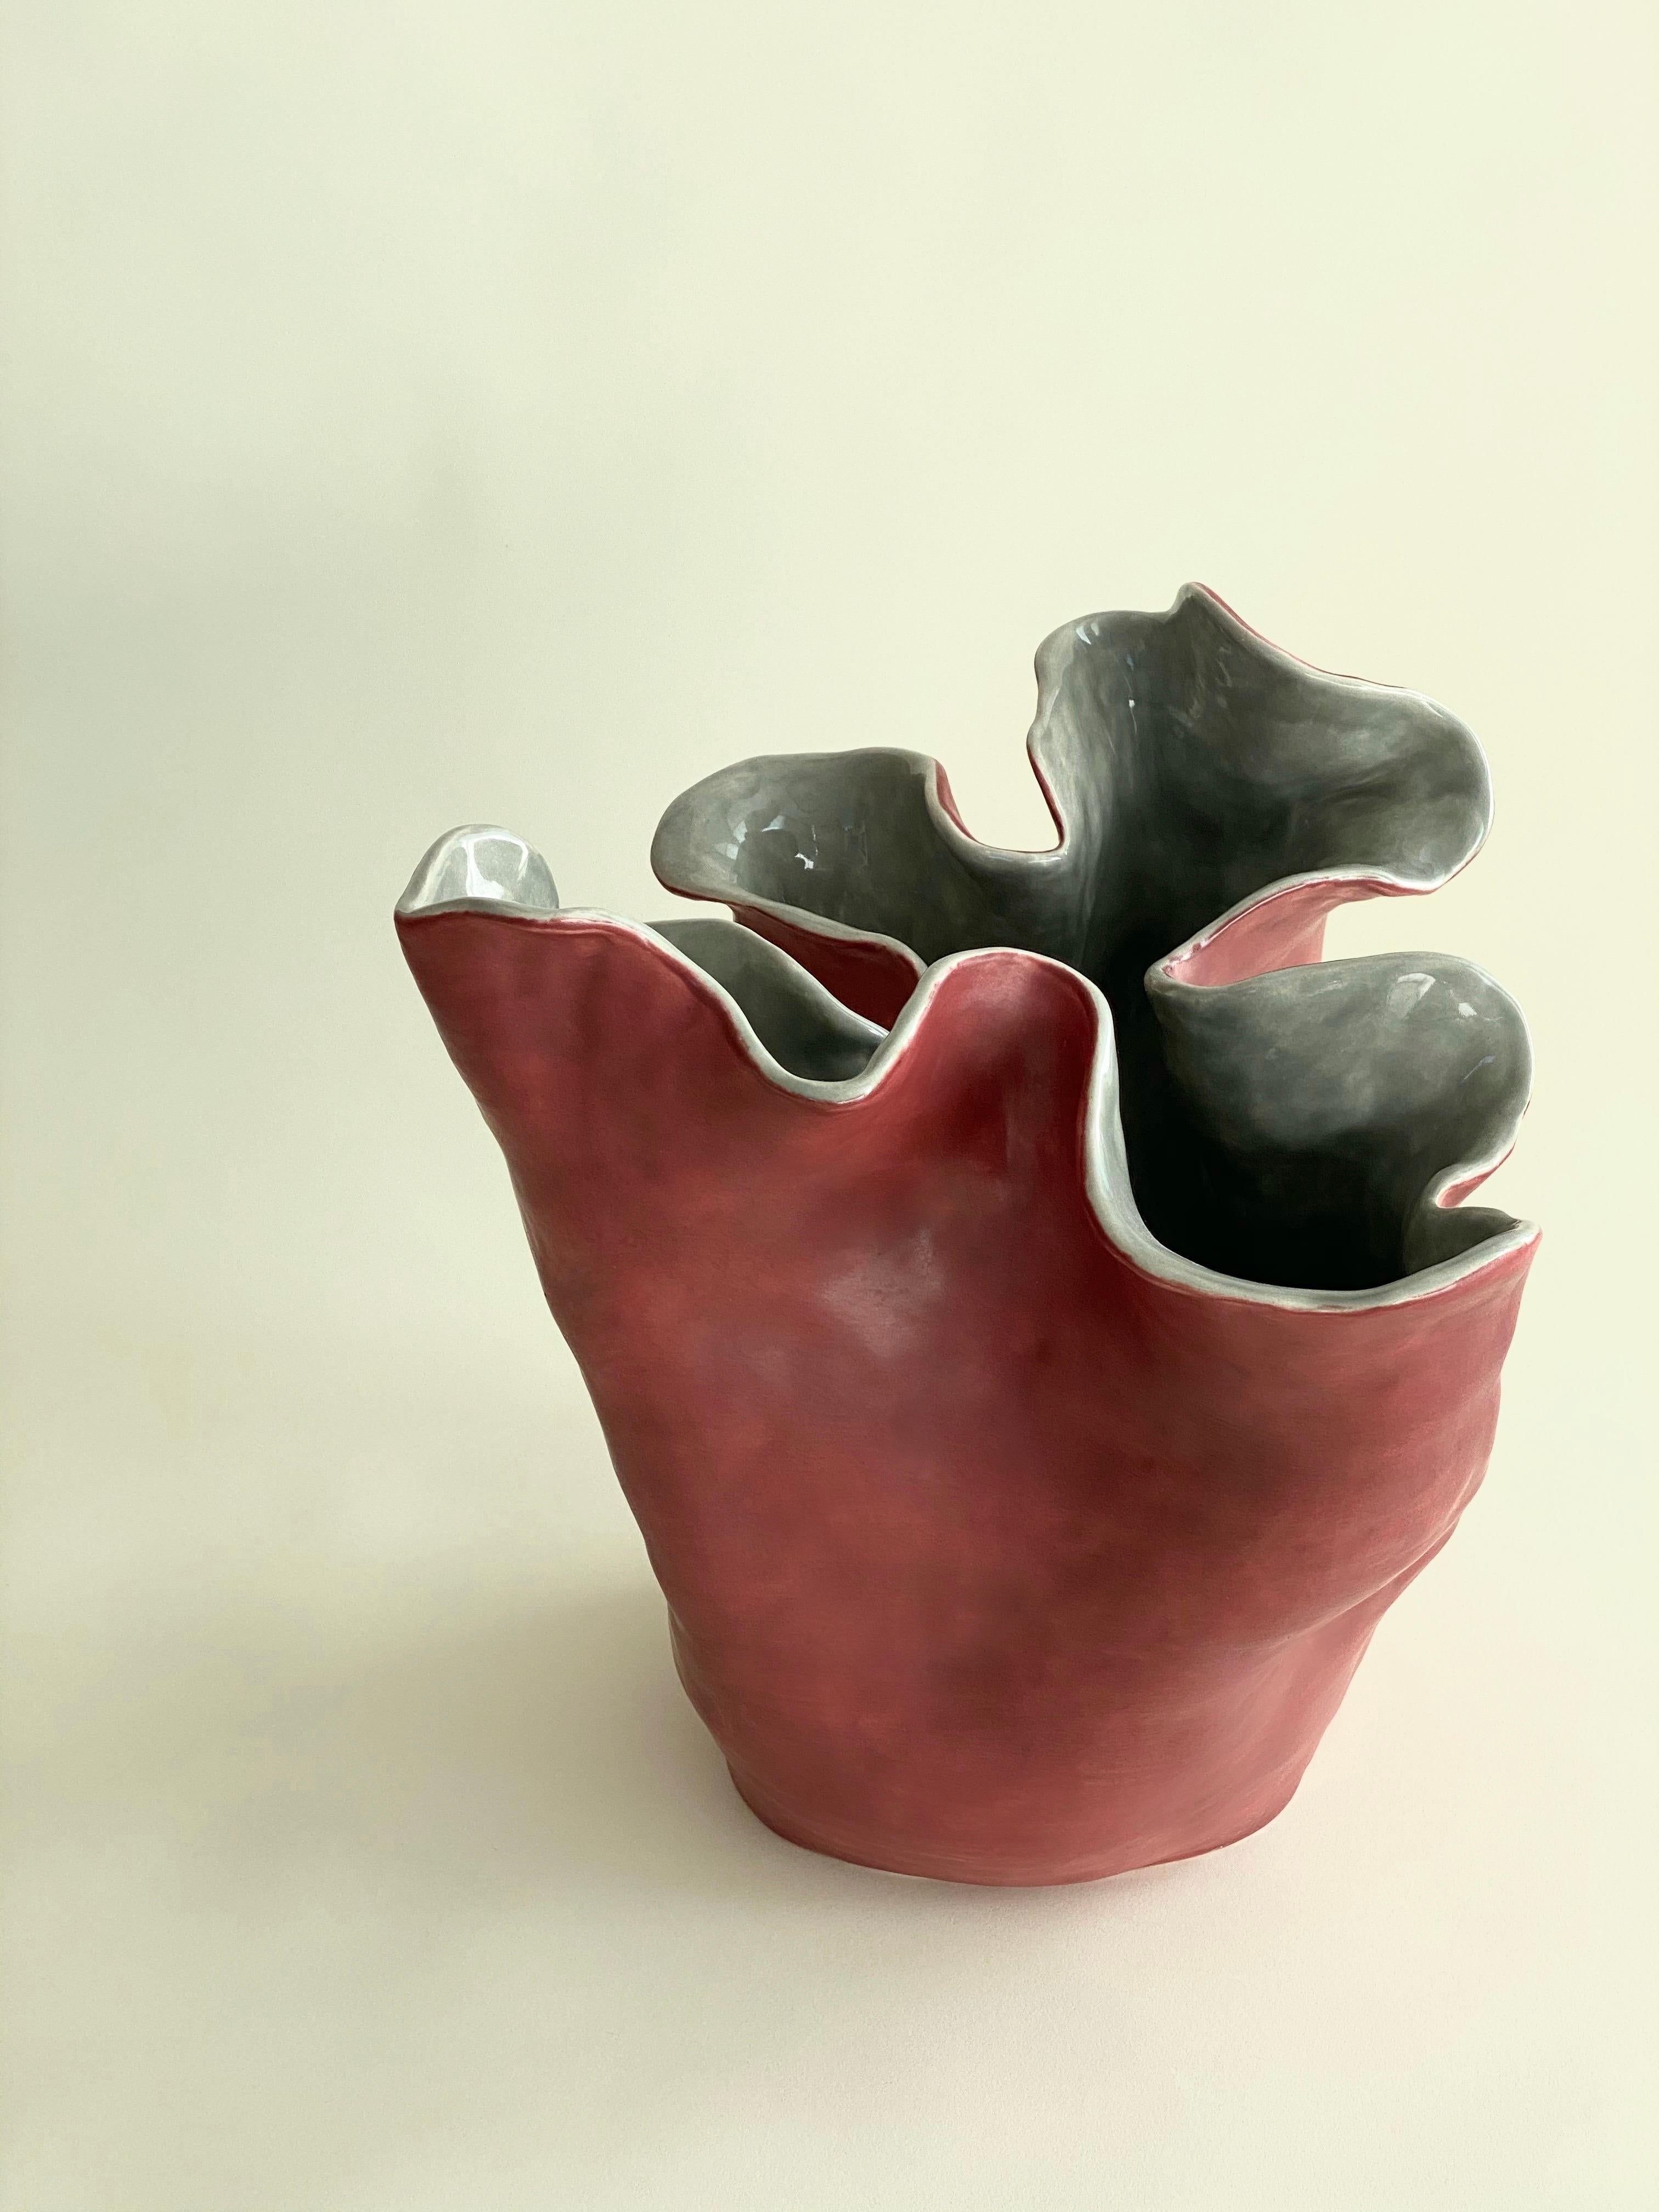 Visceral I, Red and grey, 2020 by Magda von Hanau
From the series Visceral
Clay Sculpture with Glass Glaze
Dimensions: 30.4 H x 40.6 W cm

The Visceral series delves into the intricate relationship between the mind and the body, specifically